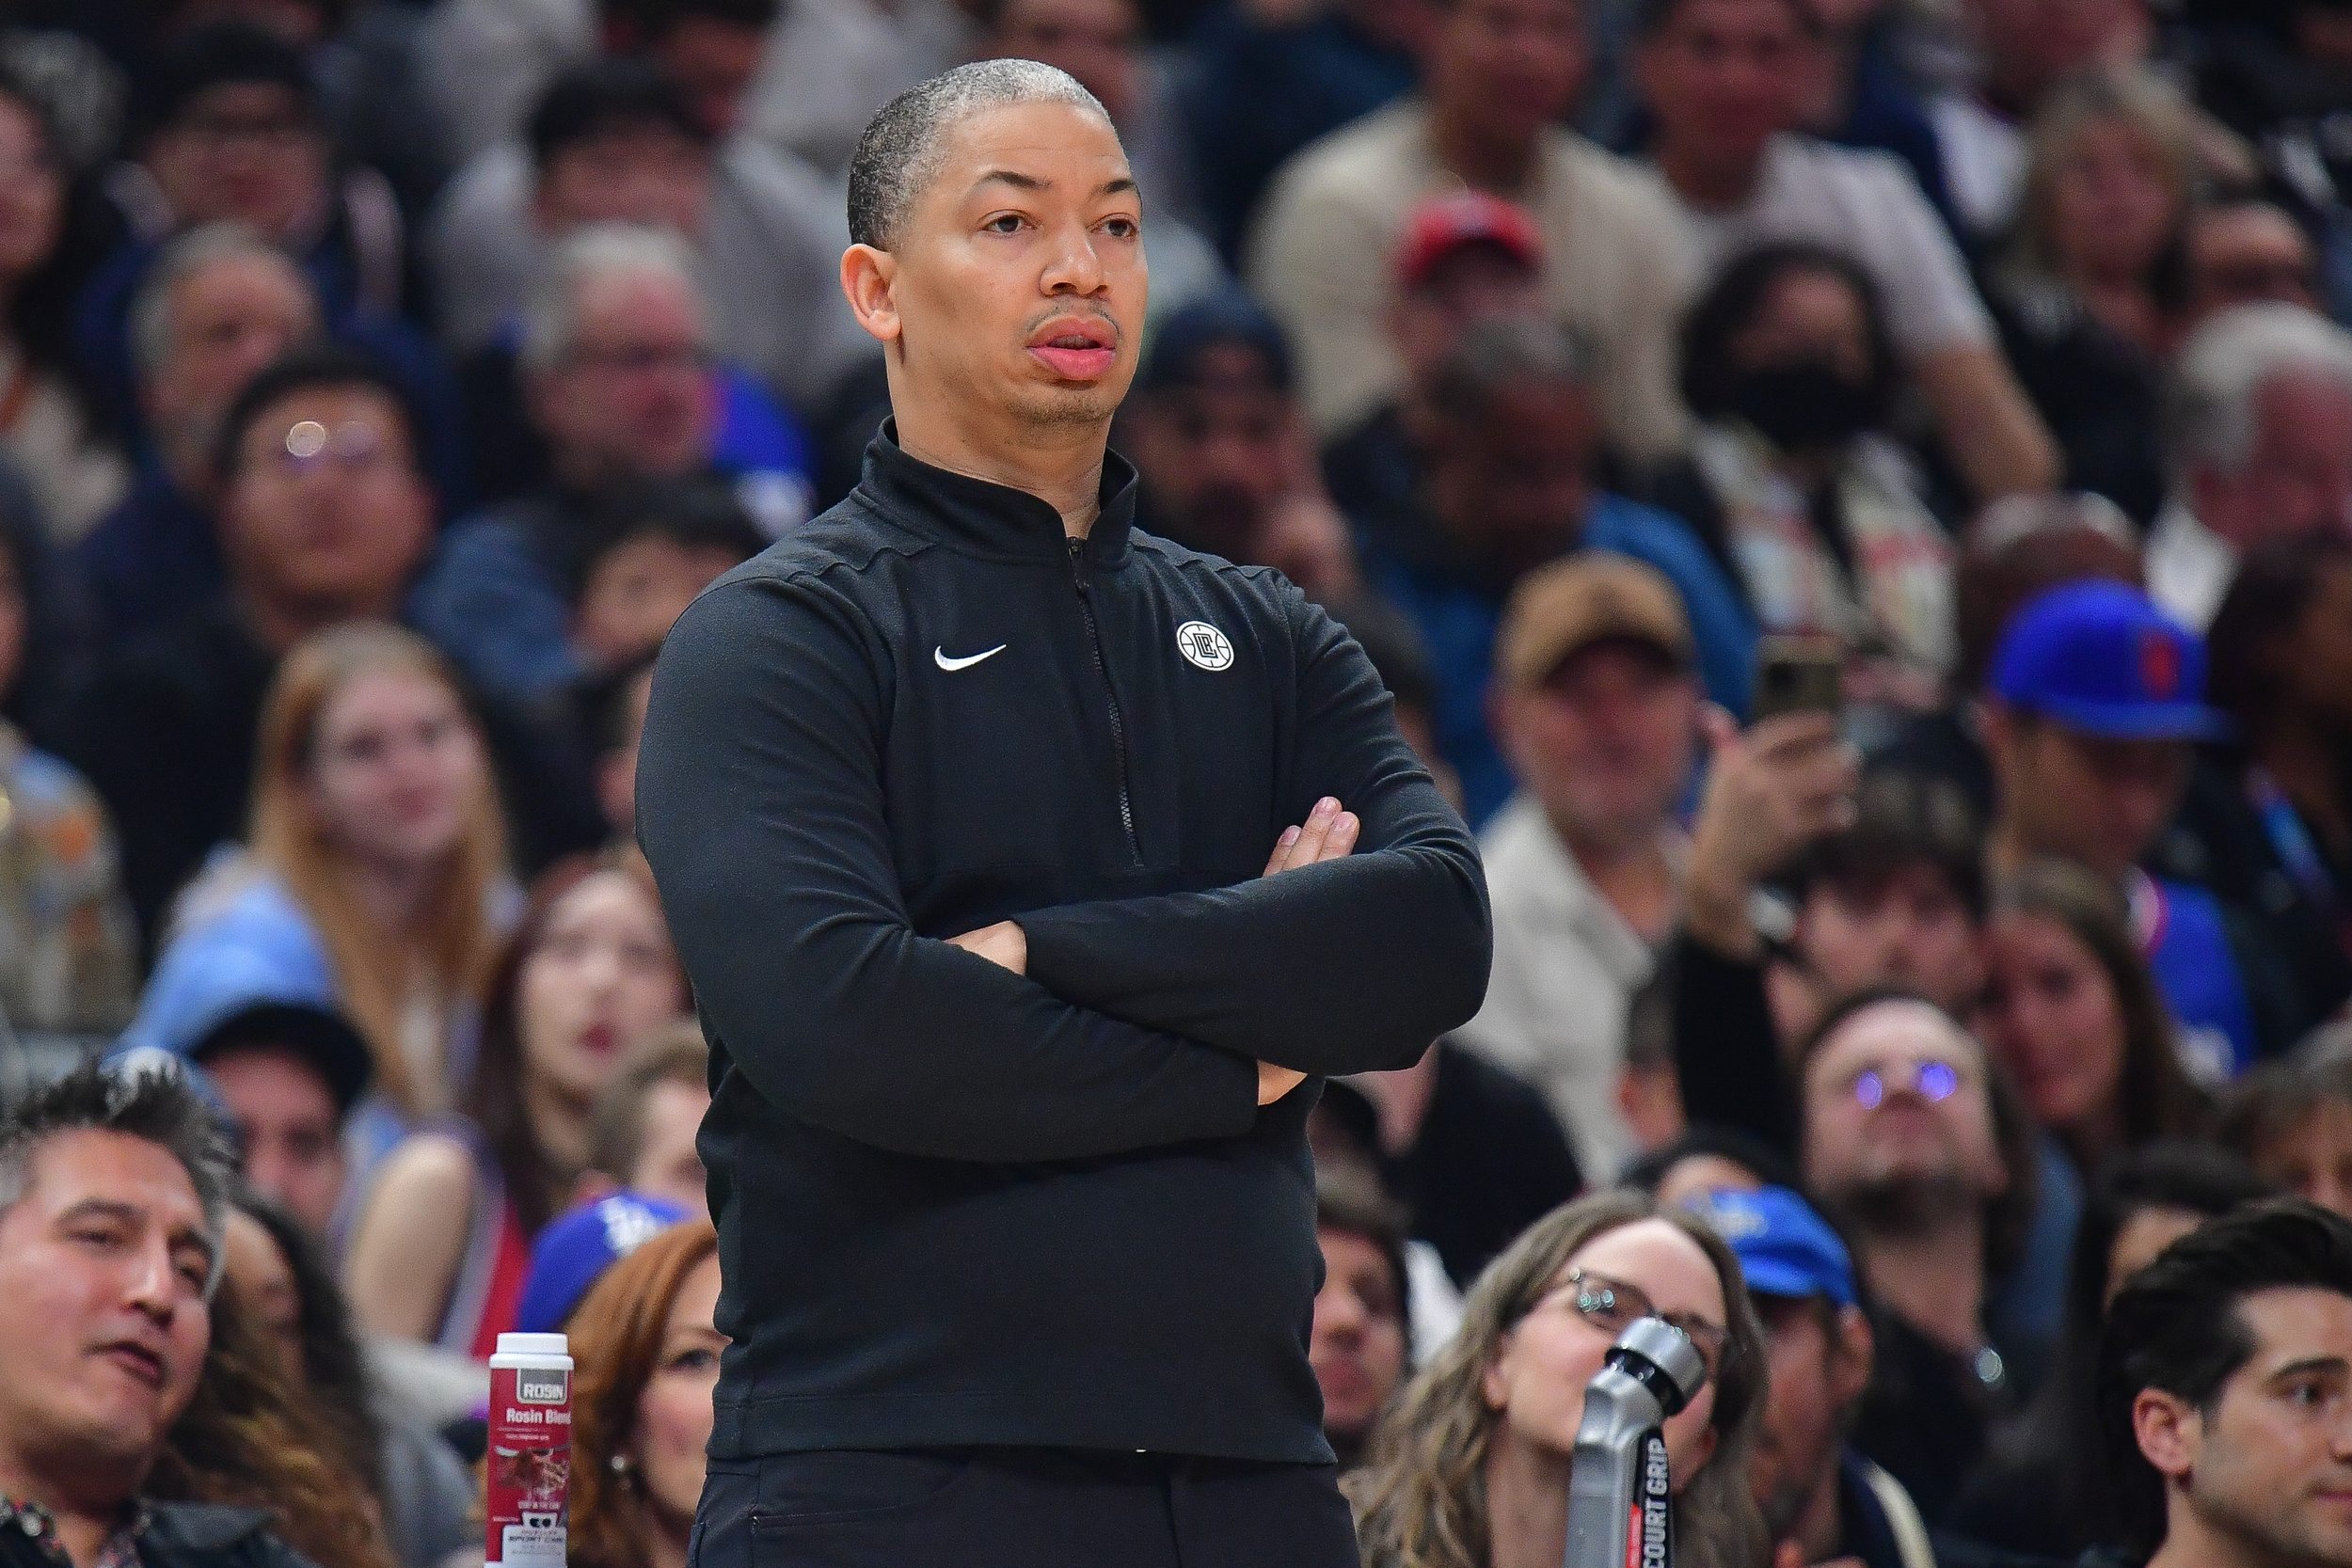 clippers hc tyronn lue ejected from wednesday's game